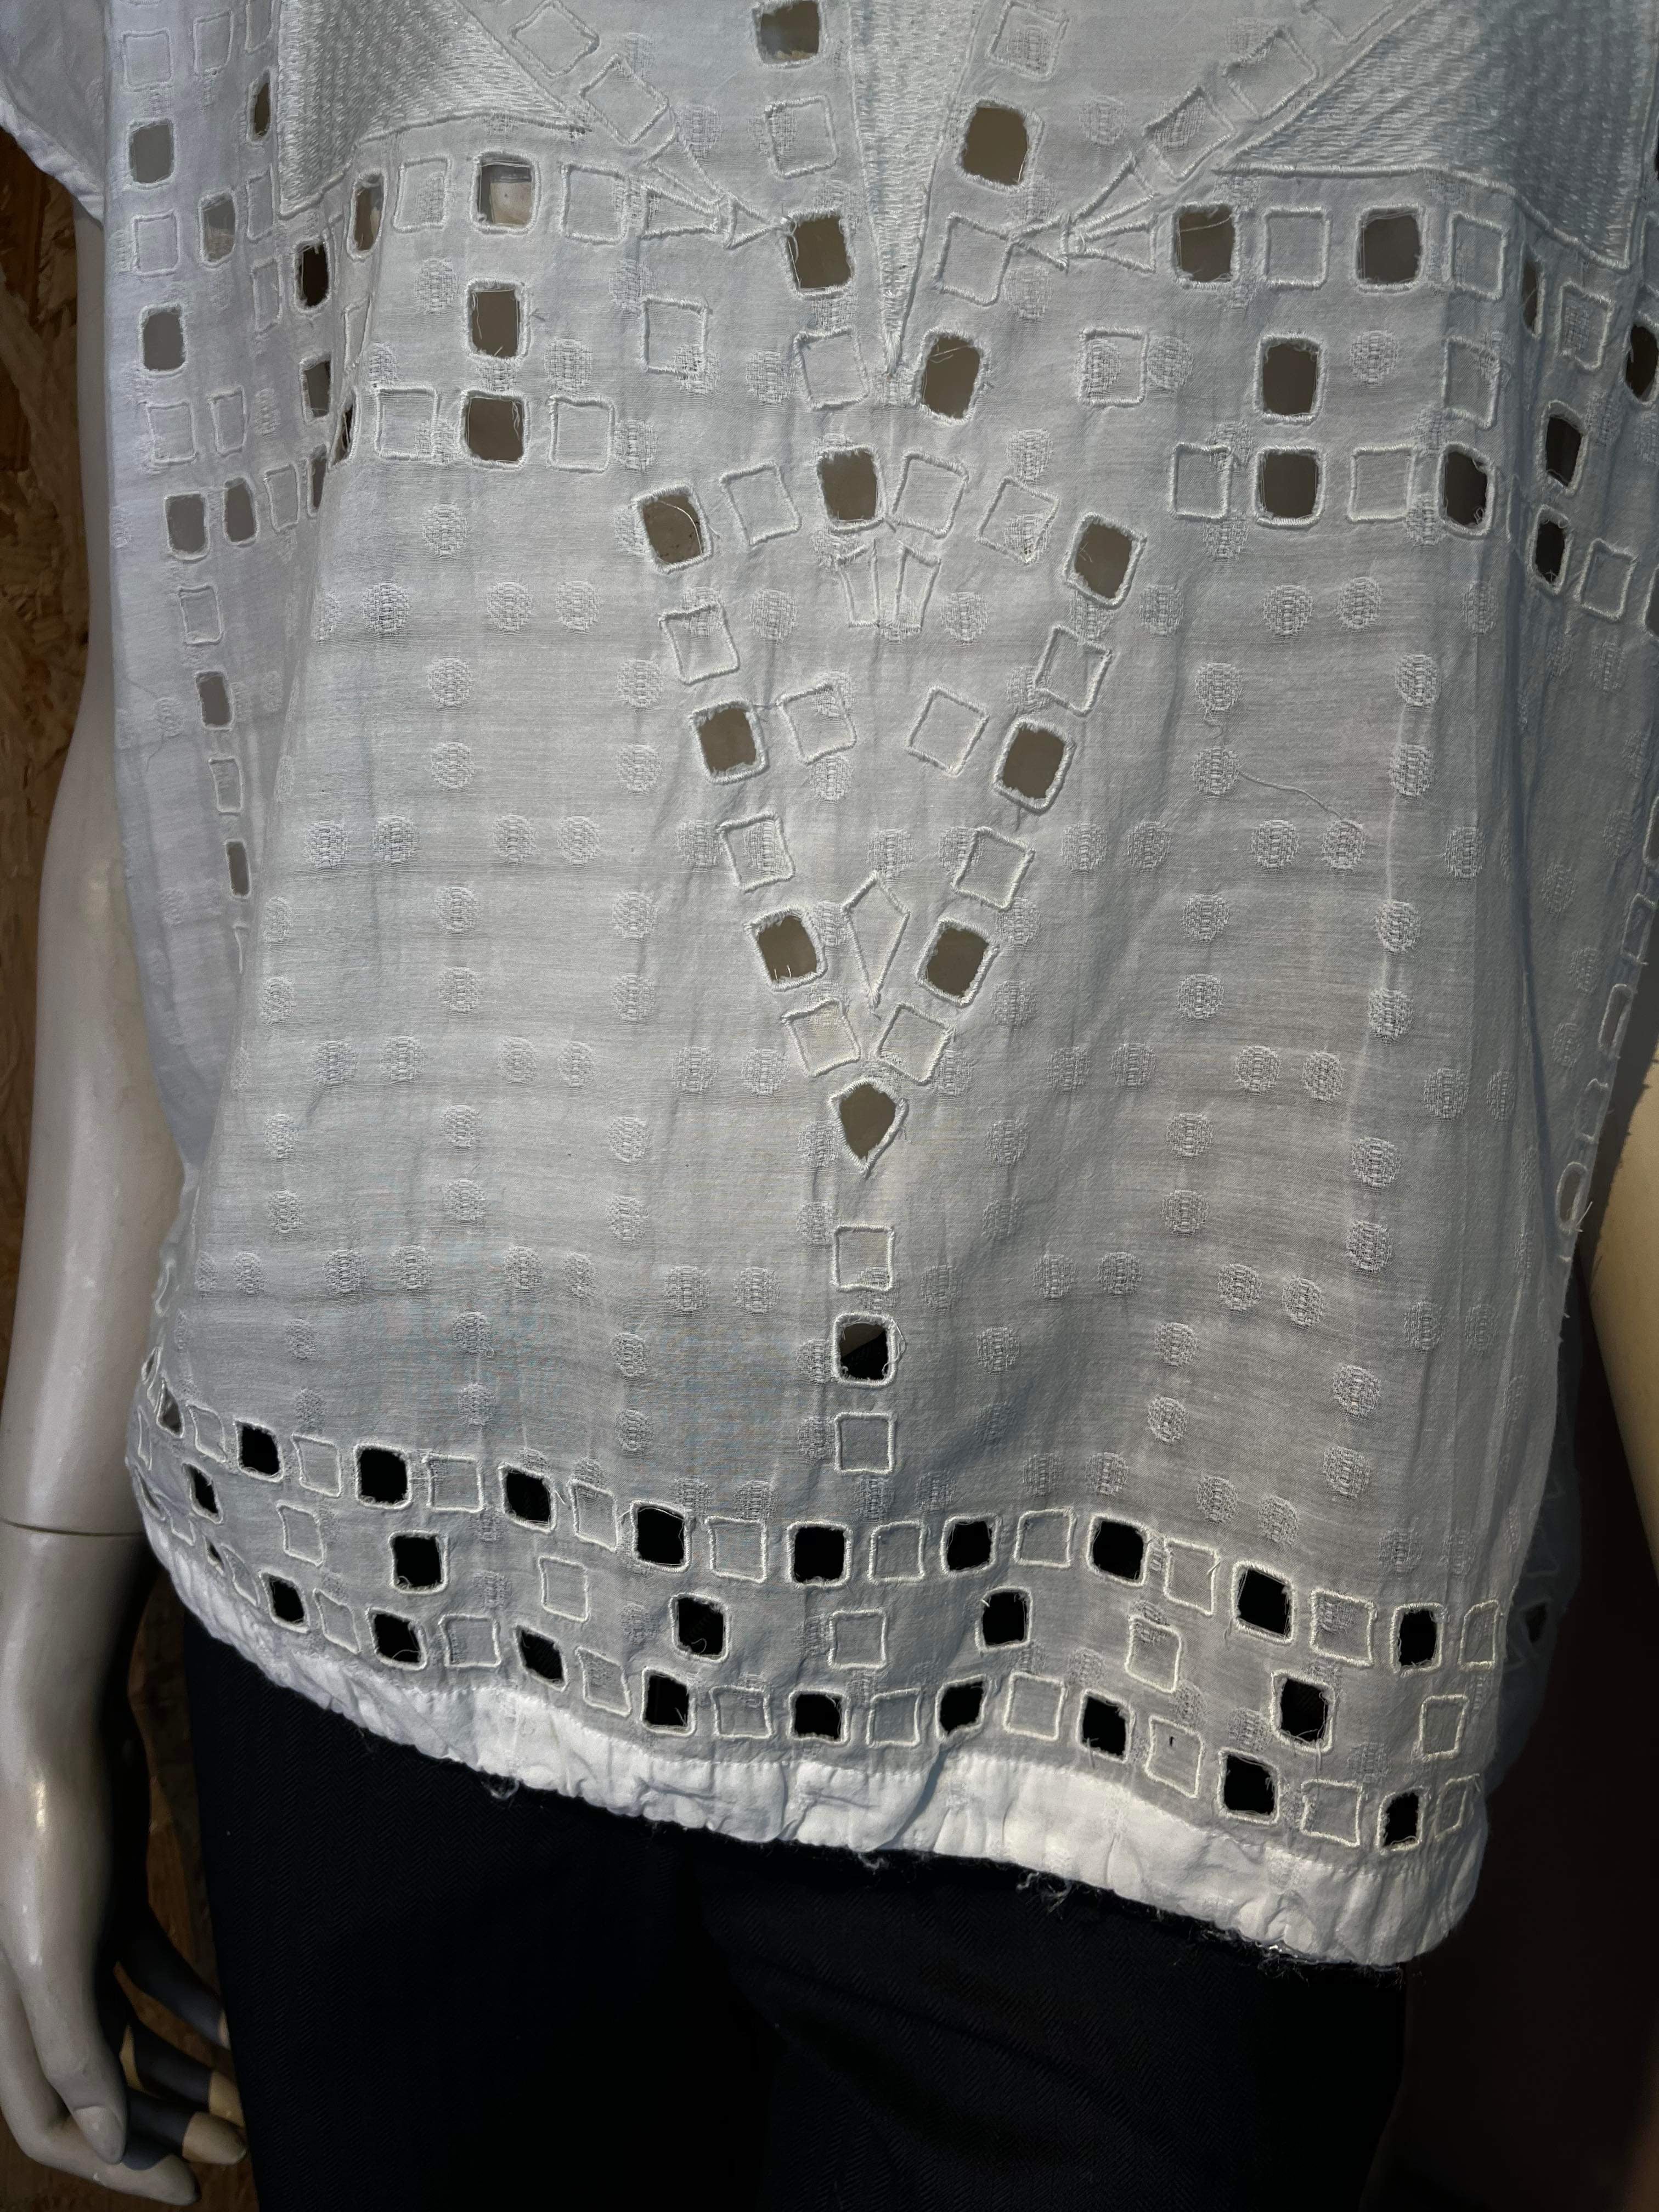 Lucky Brand - Top - Size: S